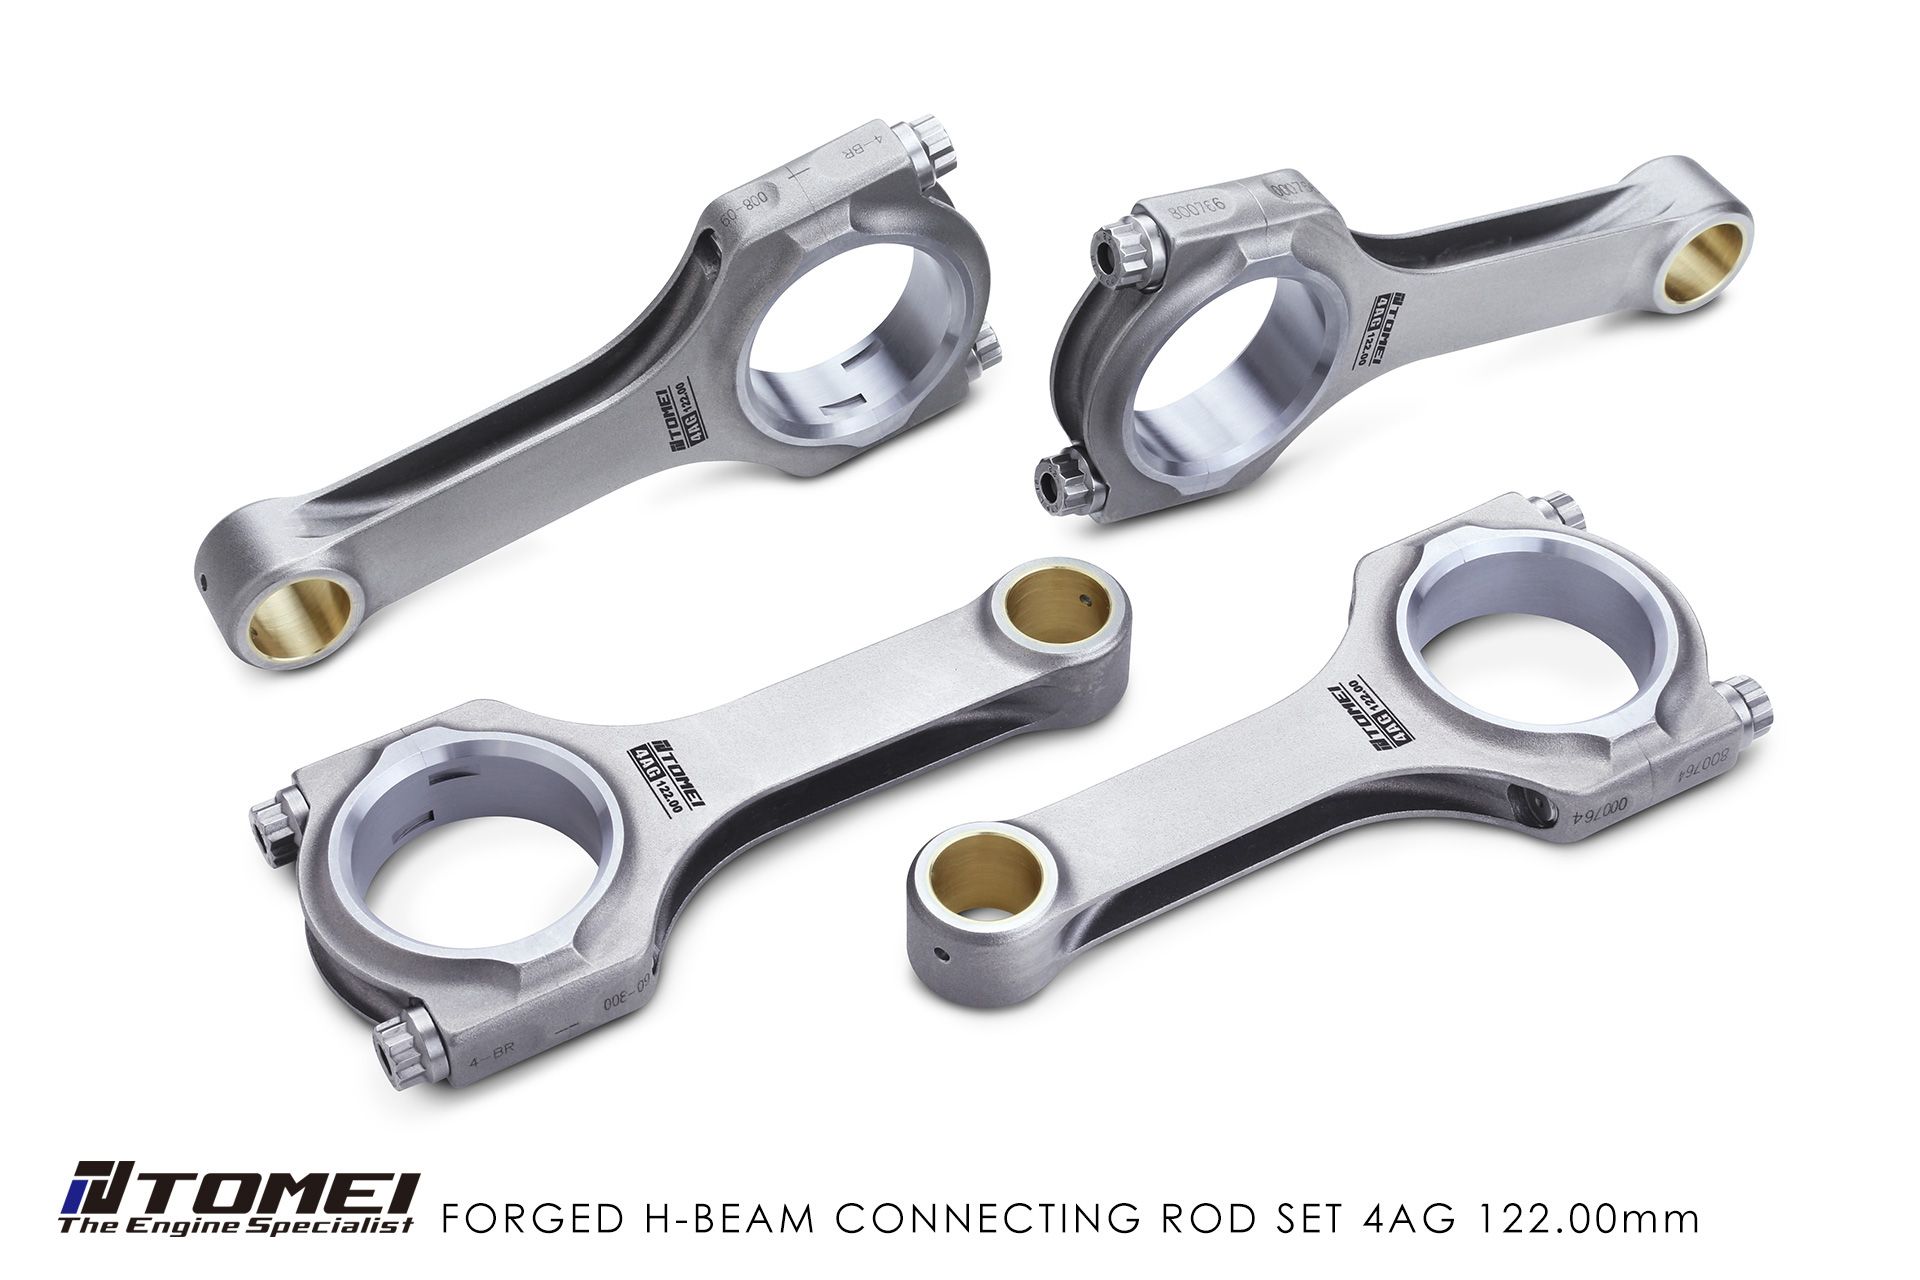 Tomei Forged H-Beam Connecting Rod Set 4AG 122mm